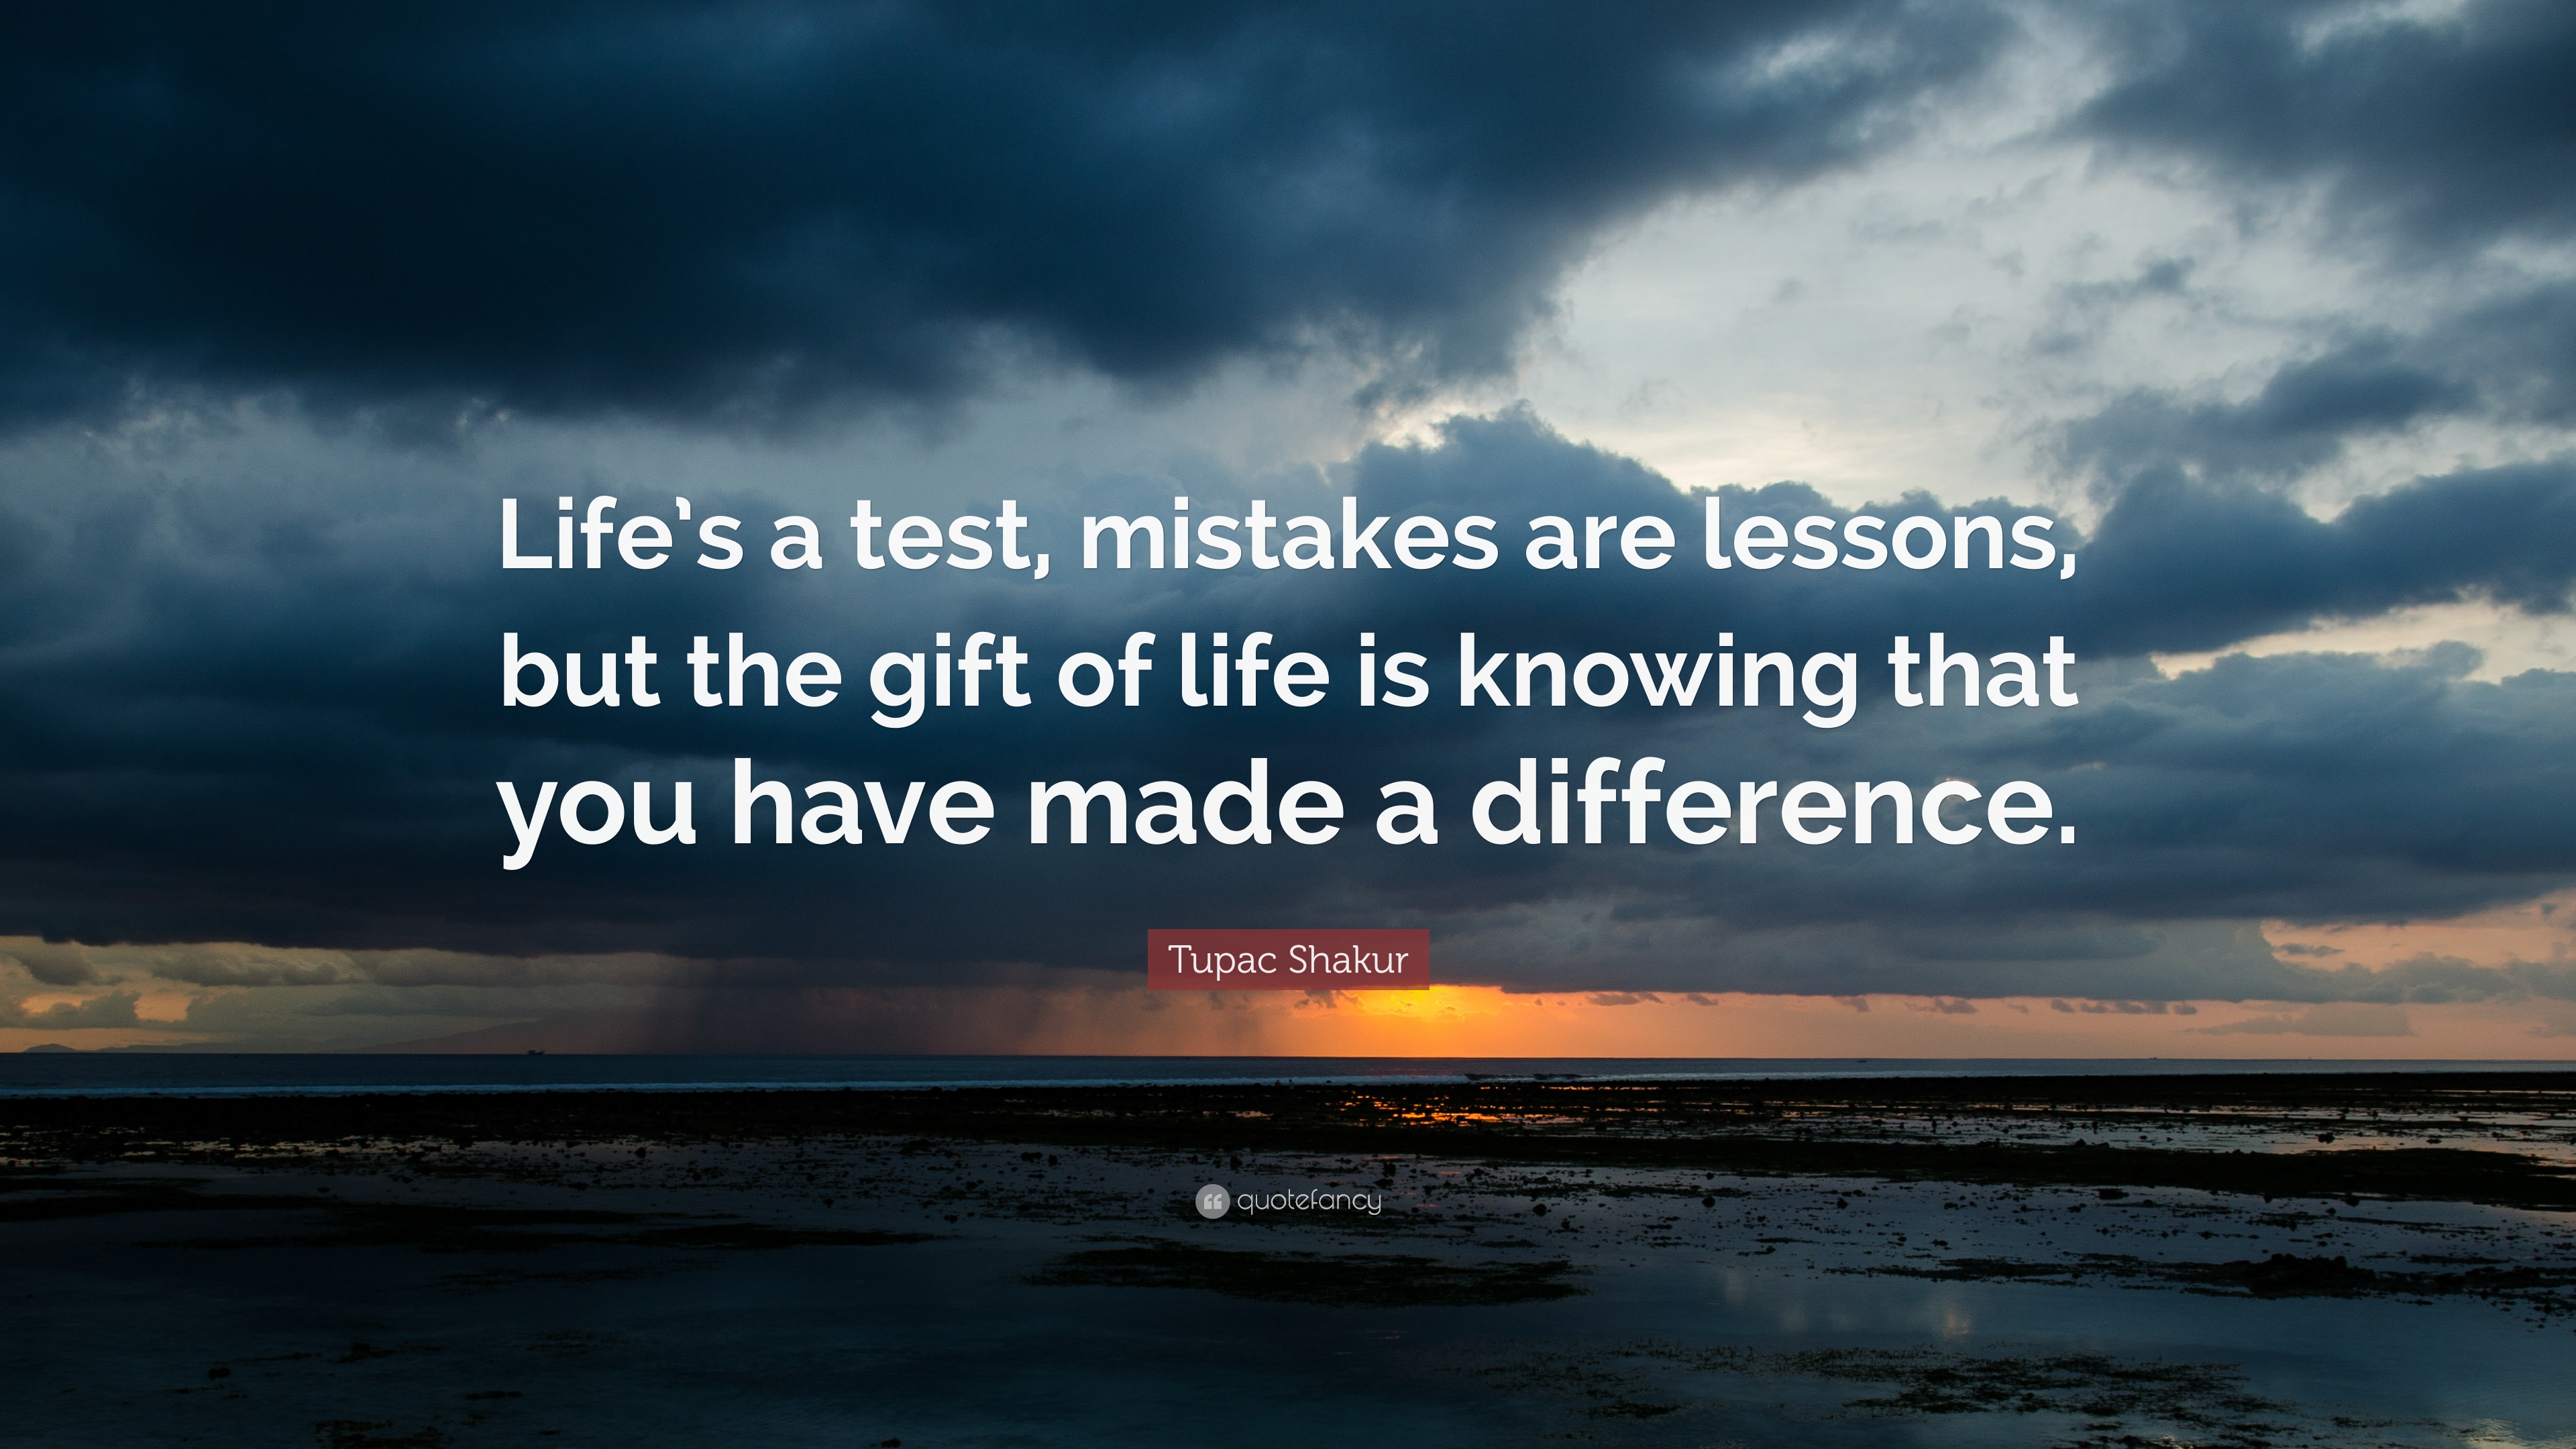 Tupac Shakur Quote: “Life's a test, mistakes are lessons, but the gift of life is knowing